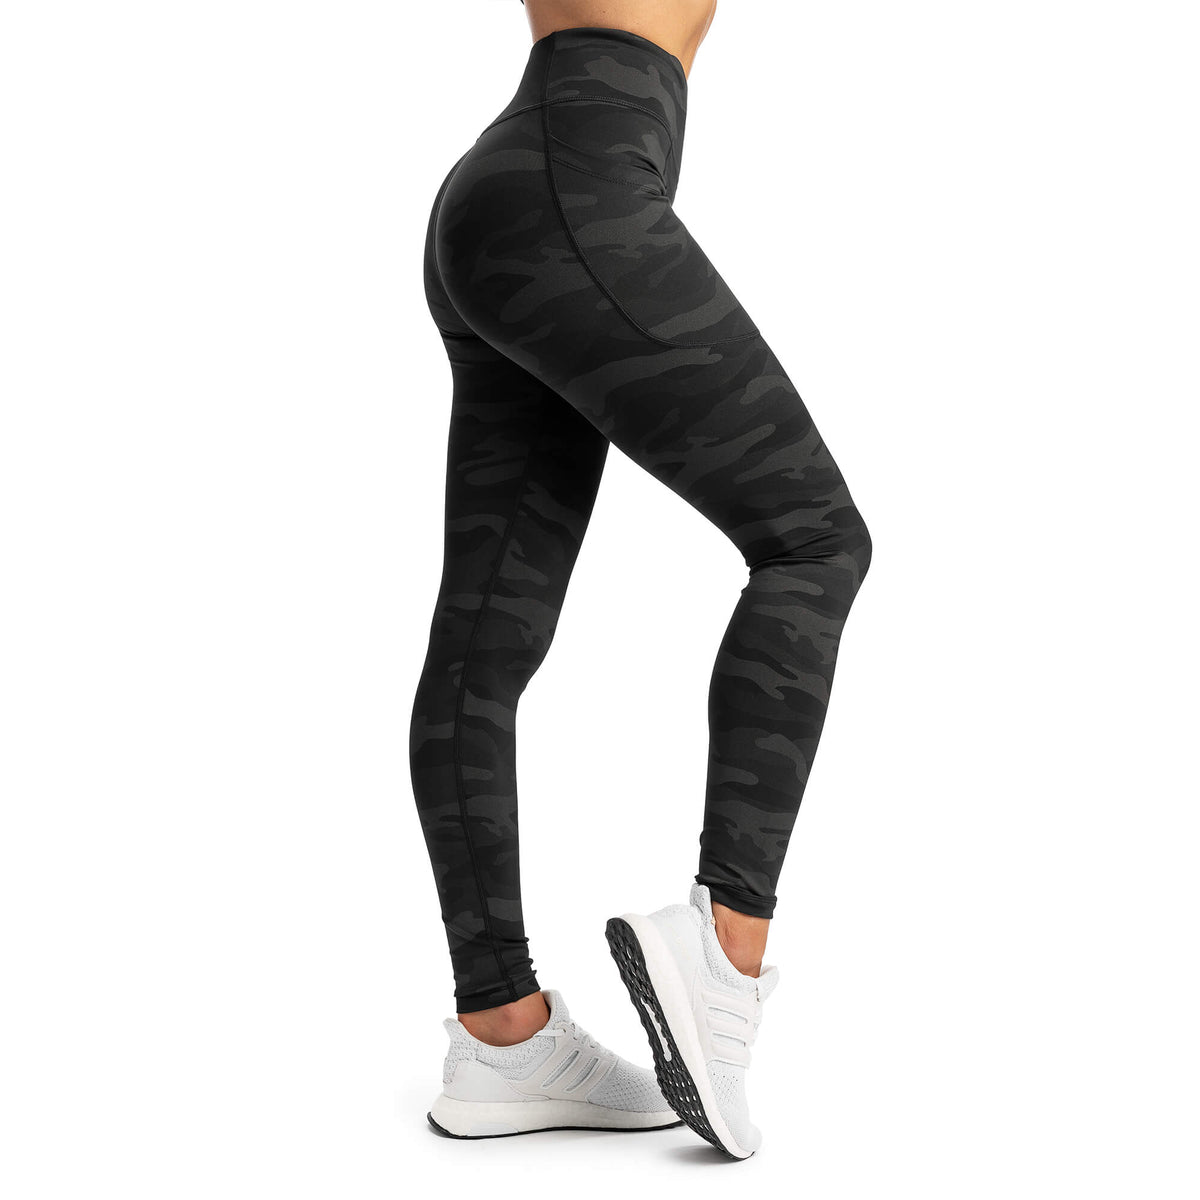 High Waist Smooth Black Spandex Leggings With Prism Holographic Side Panels  and Pockets 157441 -  Canada